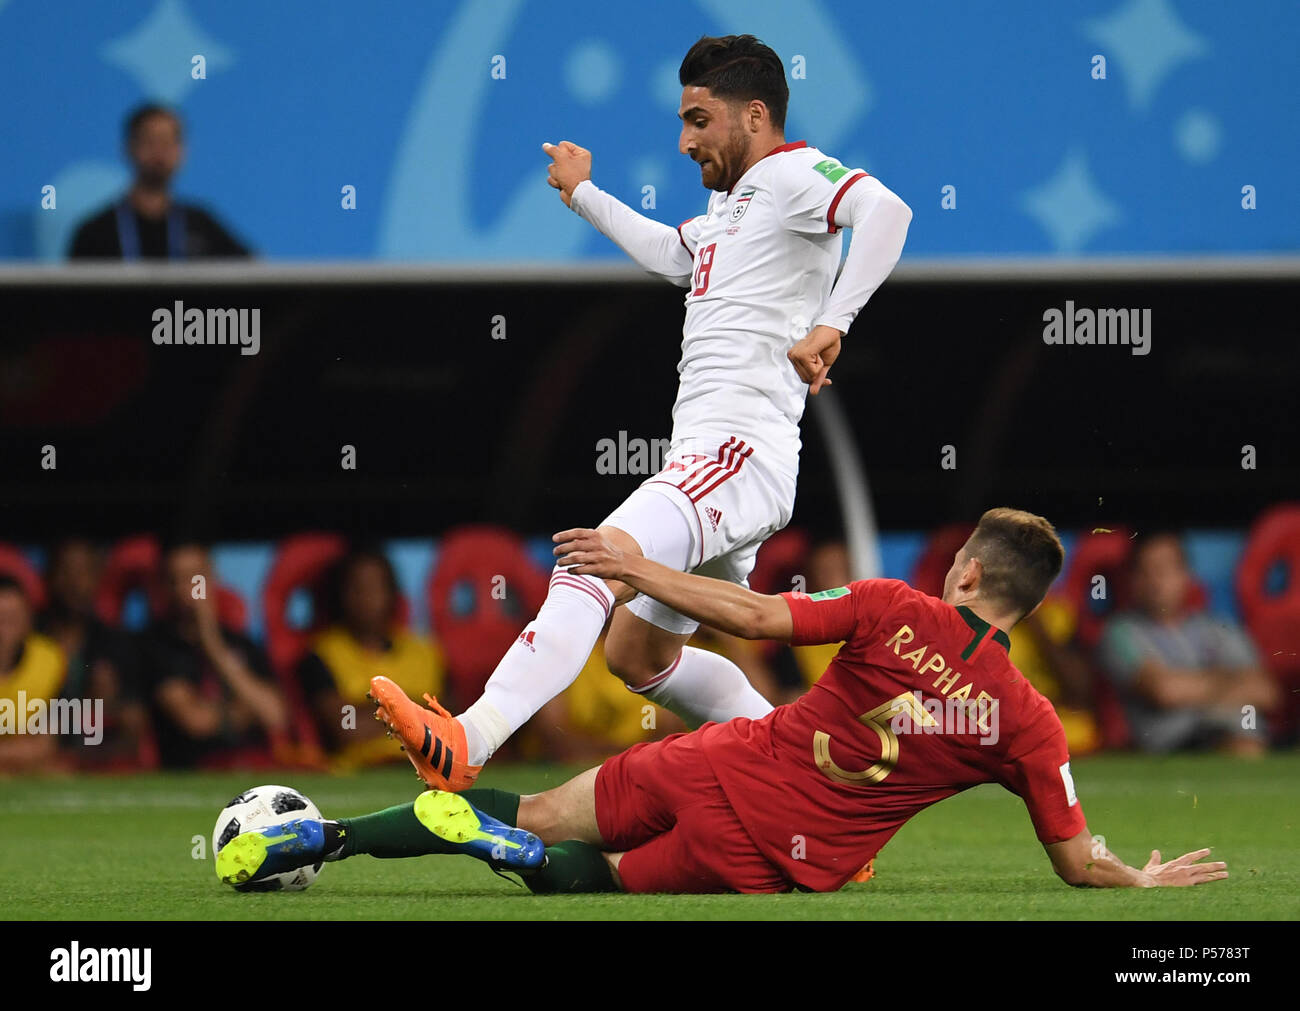 Saransk, Russia. 25th June, 2018. Soccer: FIFA World Cup 2018, Iran vs Portugal, group stages, group B, 3rd matchday: Iran's Alireza Jahanbakhsh (top) and Portugal's Raphael Guerreiro vie for the ball. Credit: Andreas Gebert/dpa/Alamy Live News Stock Photo